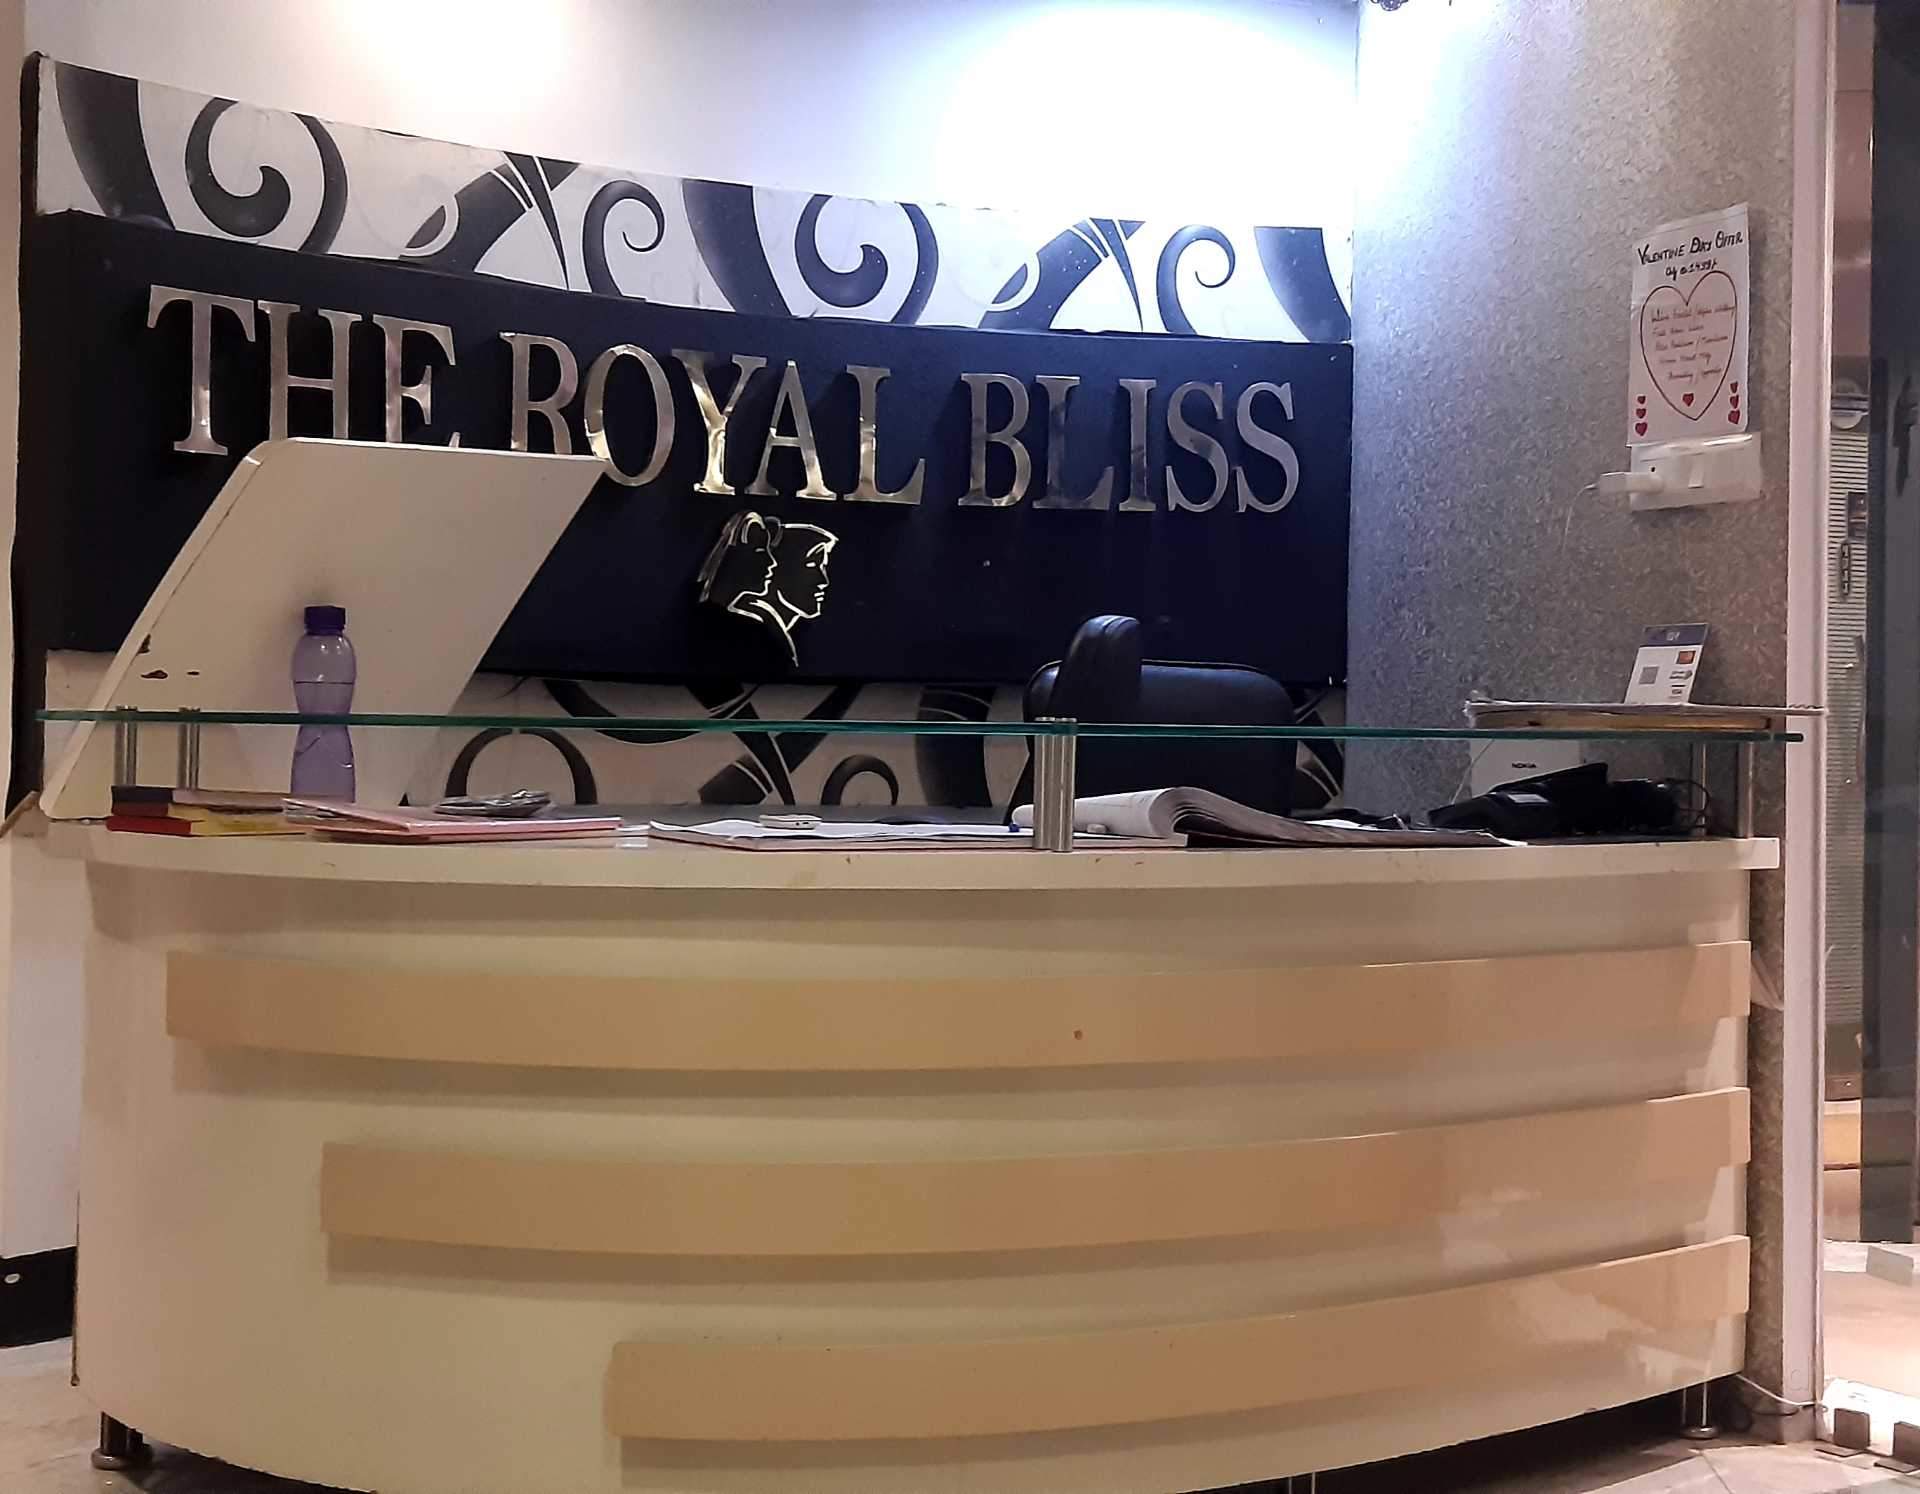 Dazzlerr - The Royal Bliss Beauty And Health Studio